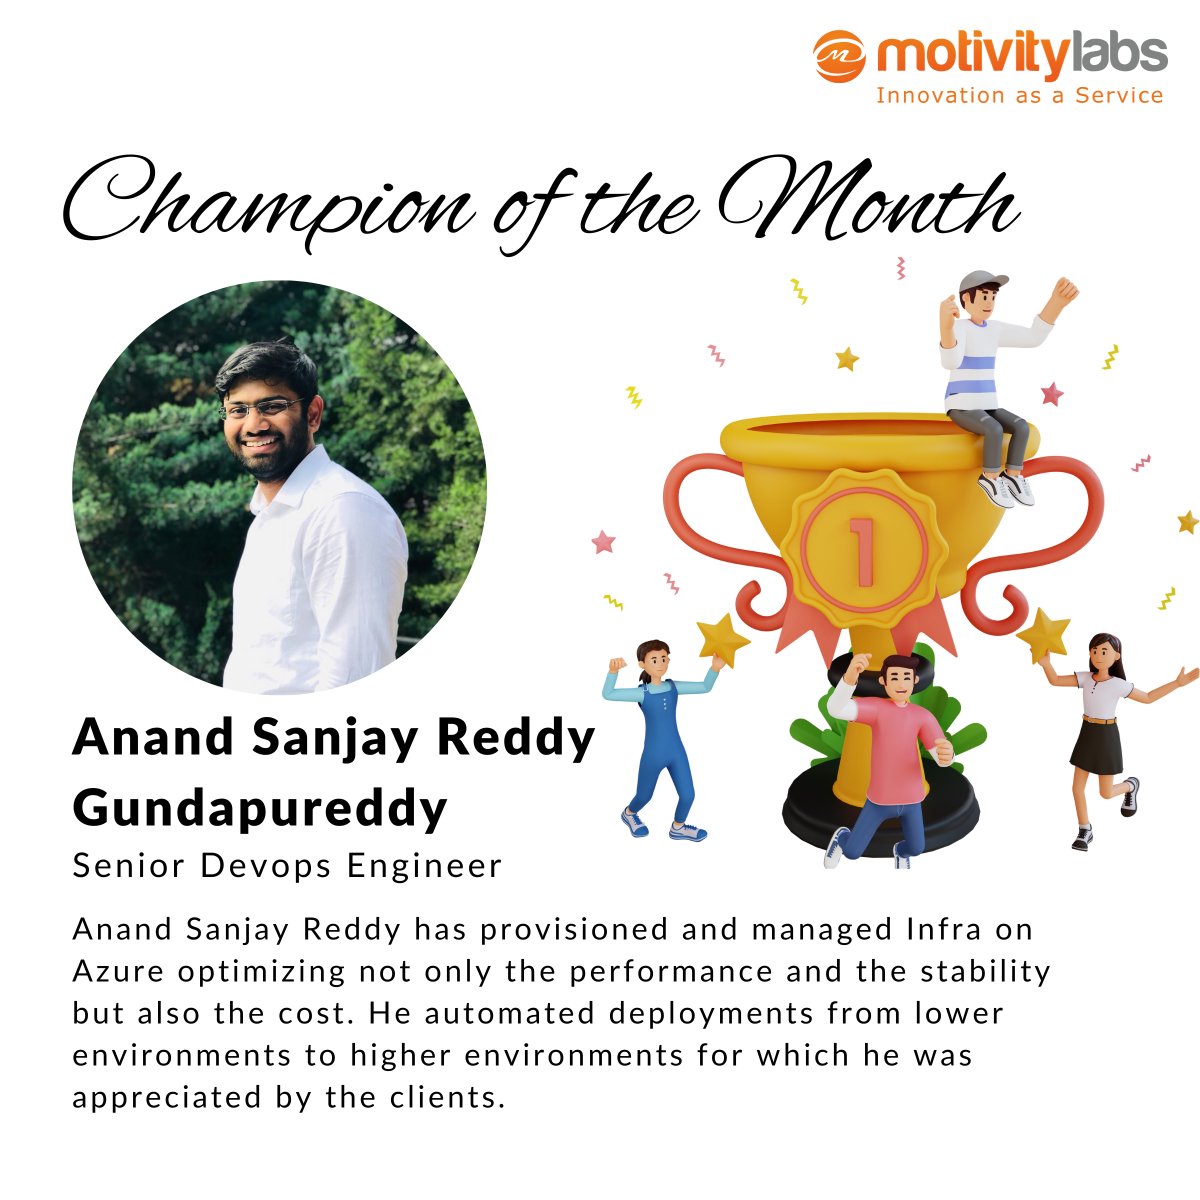 Motivity Labs is proud to spotlight our exceptional team member, Anand Sanjay Reddy Gundapureddy, as our Champion of the Month! 

#motivitylabs #MotivityChampion #innovation #devops #excellence #inspiration #DevOpsExpert #hardwork #technology #success #ChampionOfTheMonth